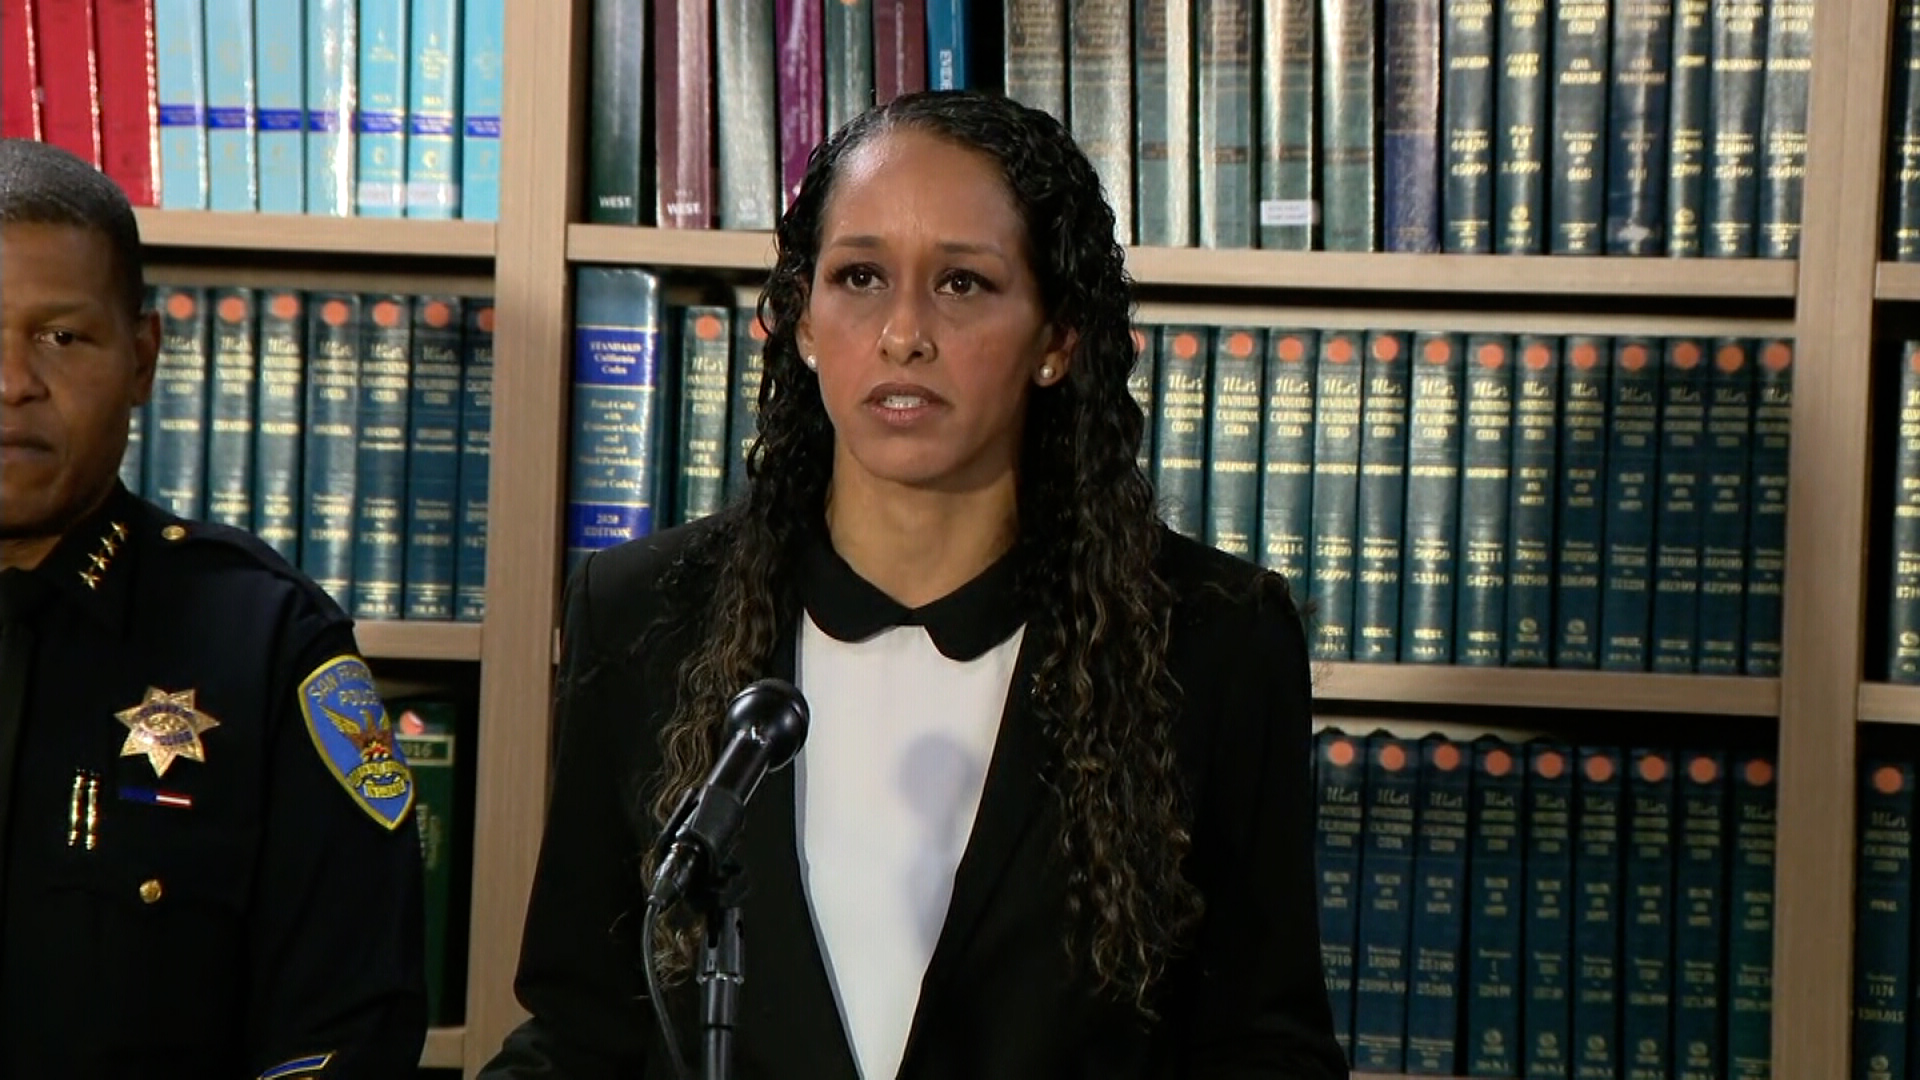 San Francisco District Attorney Brooke Jenkin speaks at a press conference on Monday.